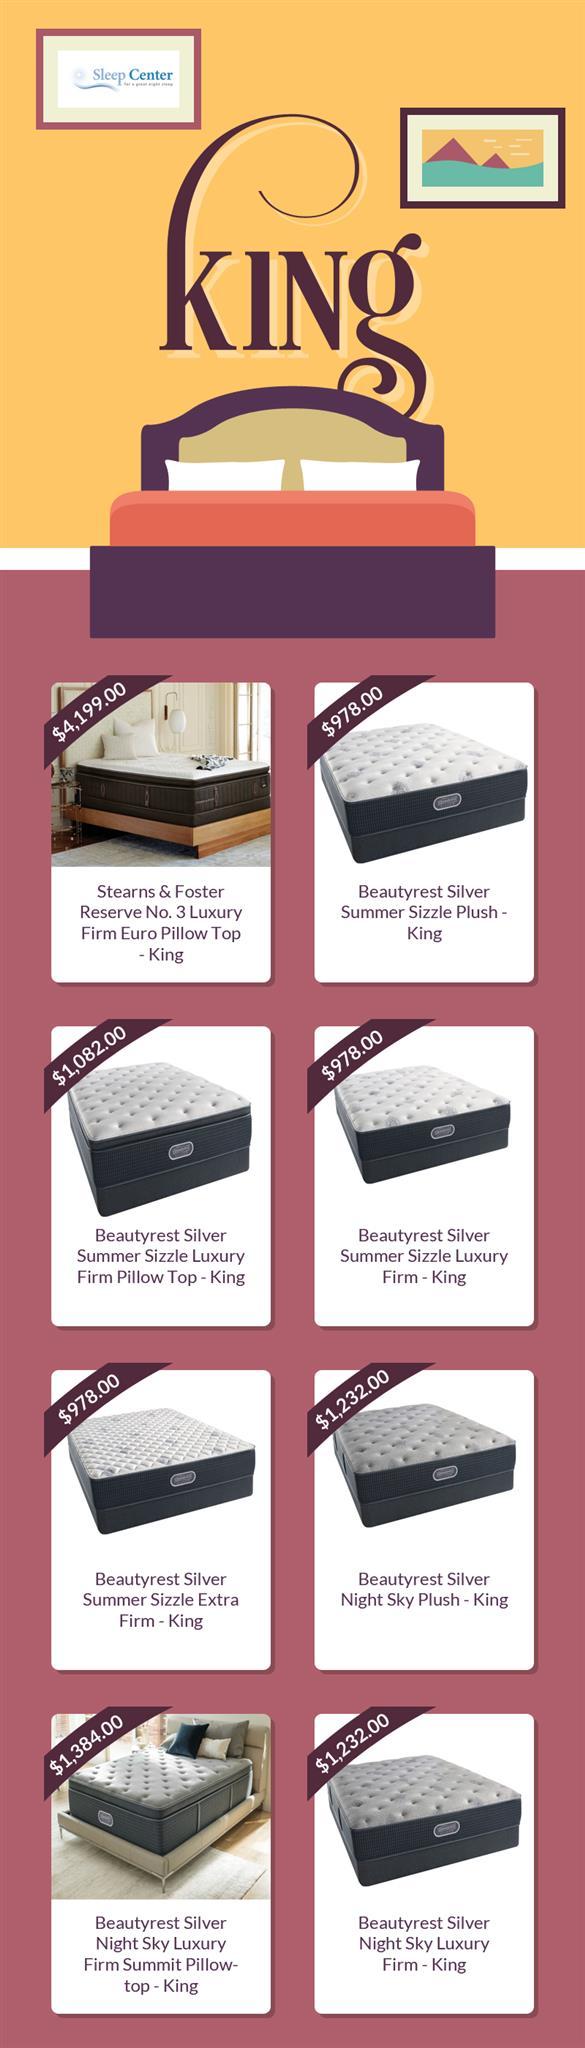 Shop for King Size Mattresses Online with Sleep Center